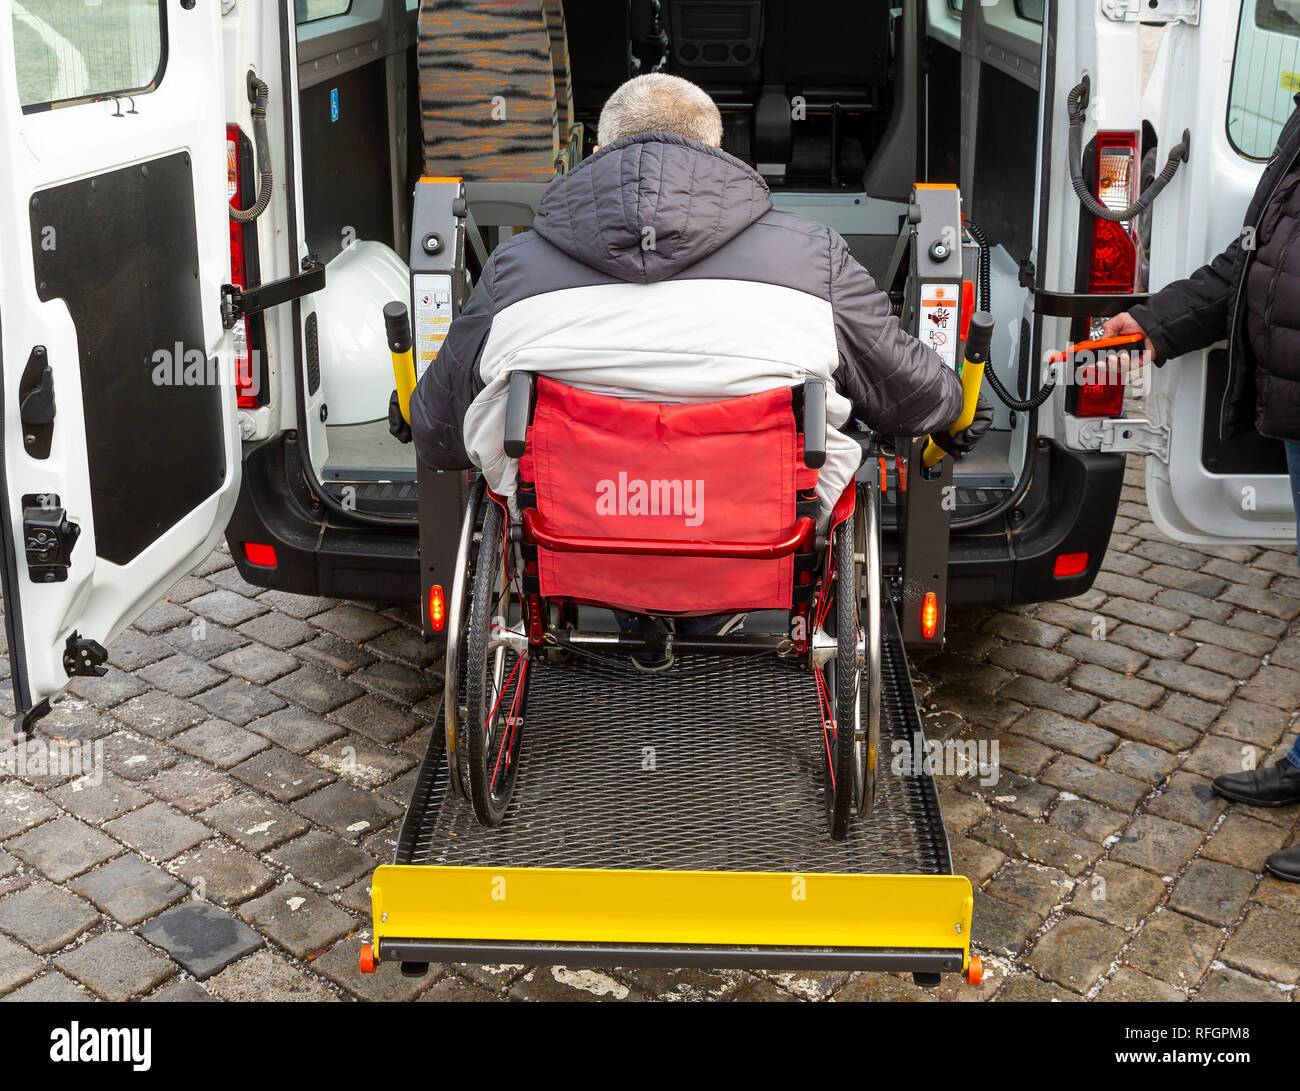 Minibus for handicapped, physically challenged and disabled people in wheelchairs. Minibus with stowed wheelchair ramp. Stock Photo